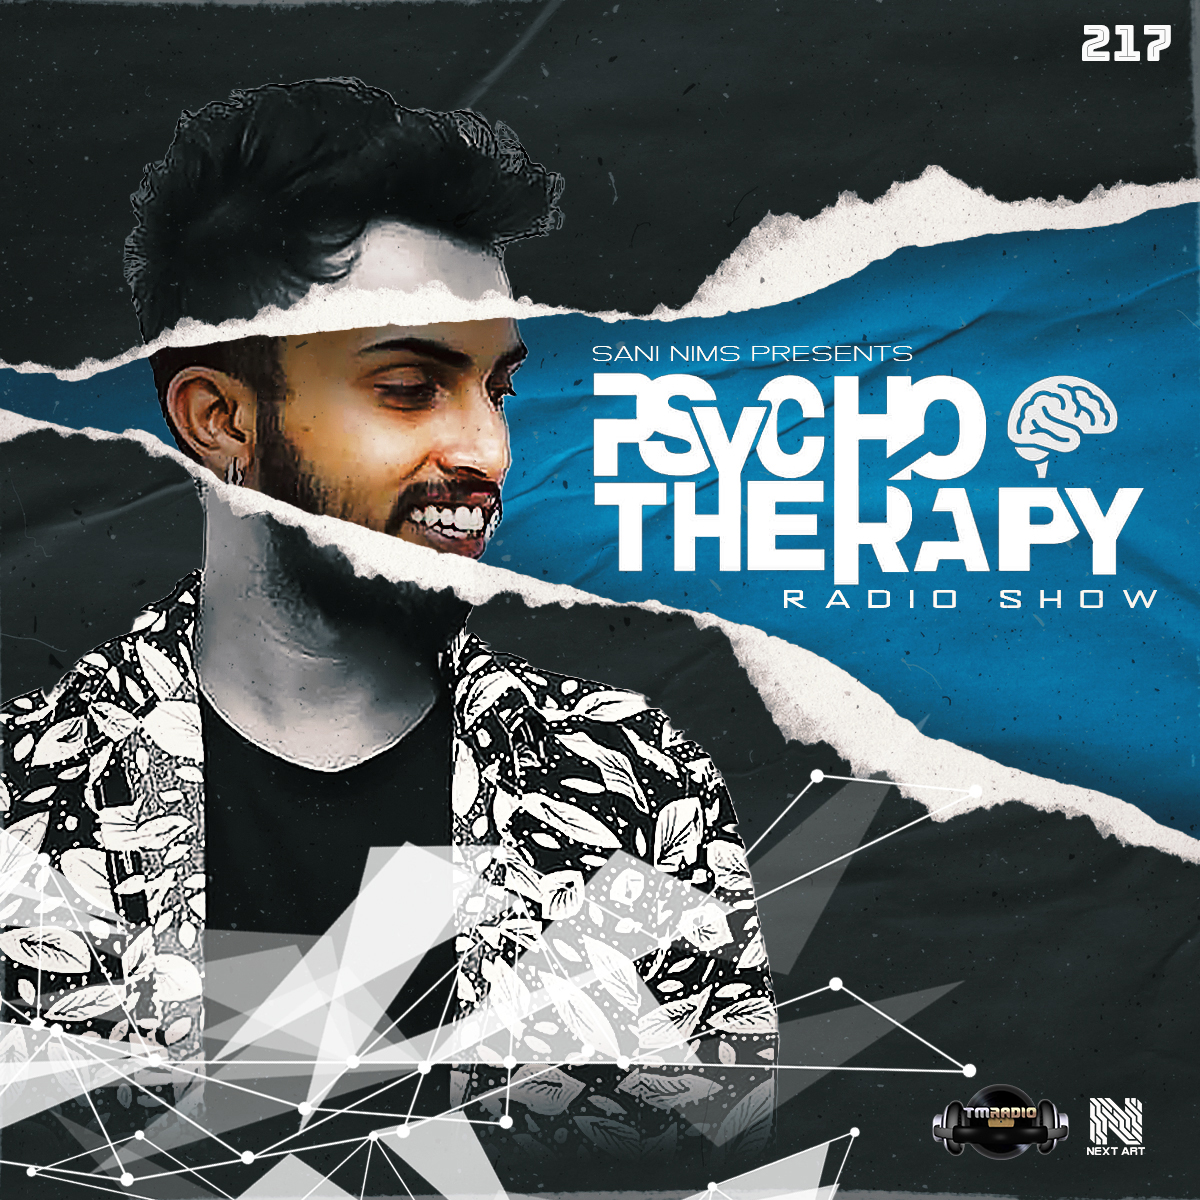 PSYCHO THERAPY EP 217 BY SANI NIMS ON TM RADIO (from November 30th, 2022)